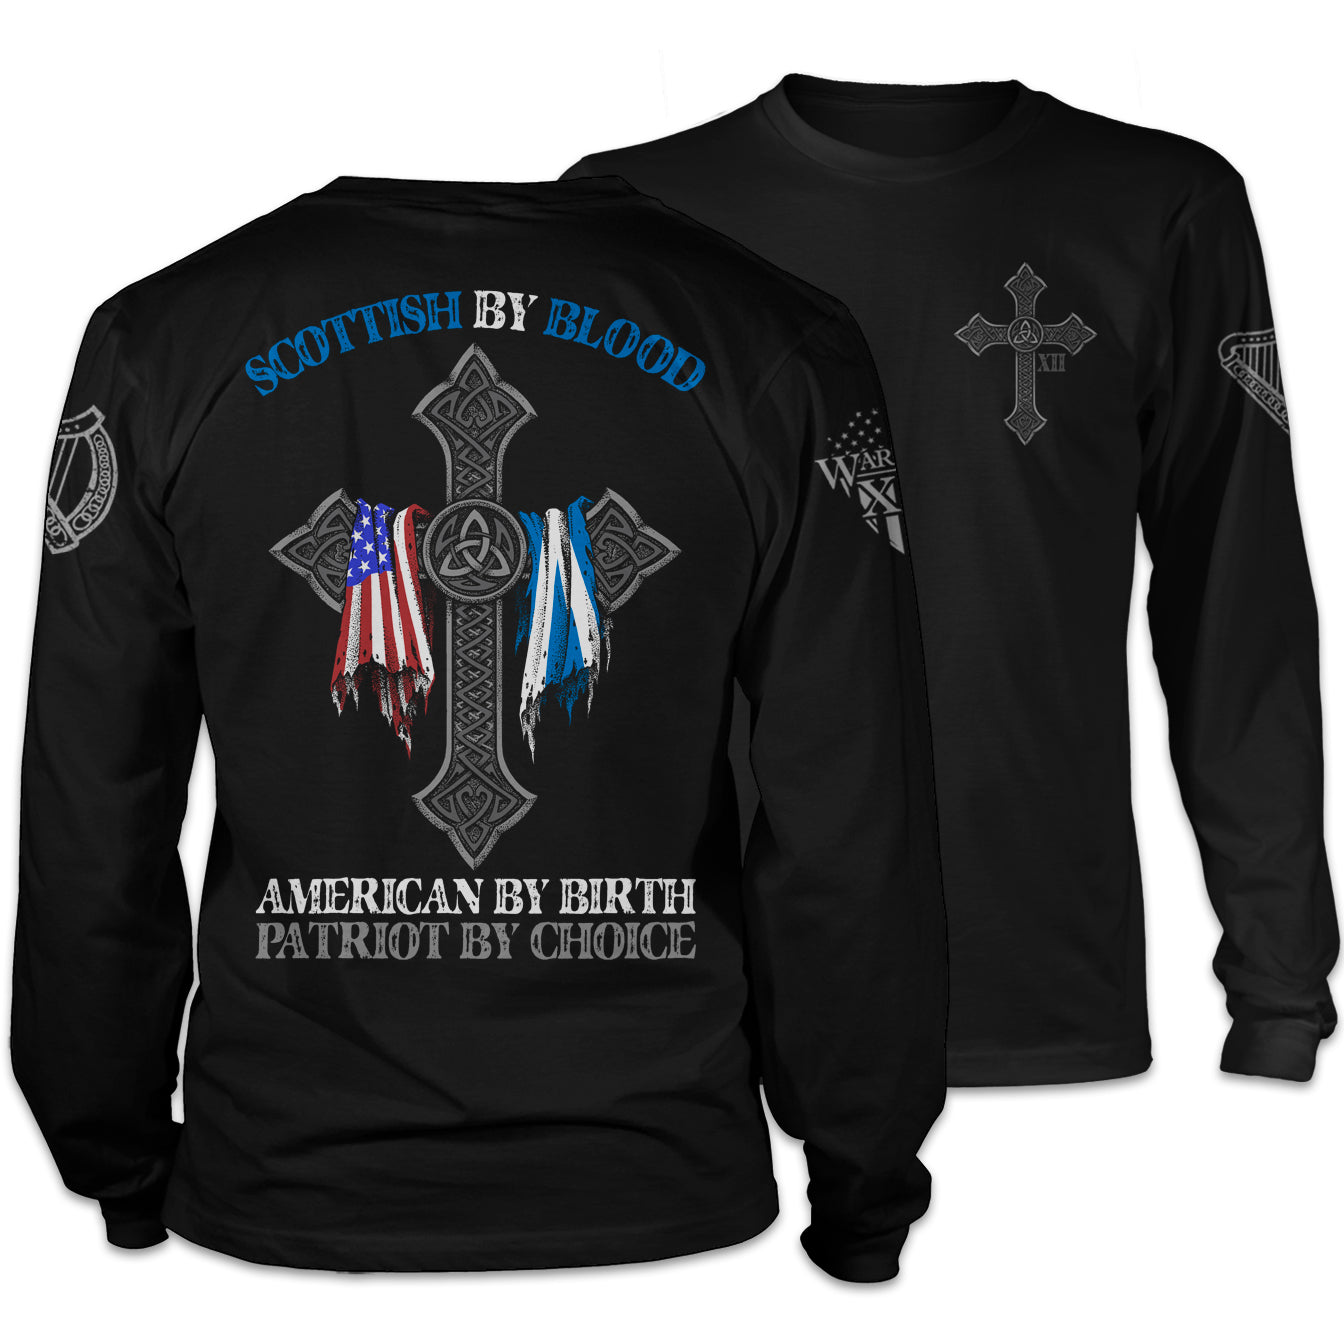 Front and back black long sleeve shirt with the words "Scottish by blood, American by birth, patriot by choice" with a cross holding the American and Scottish flag printed on the shirt.